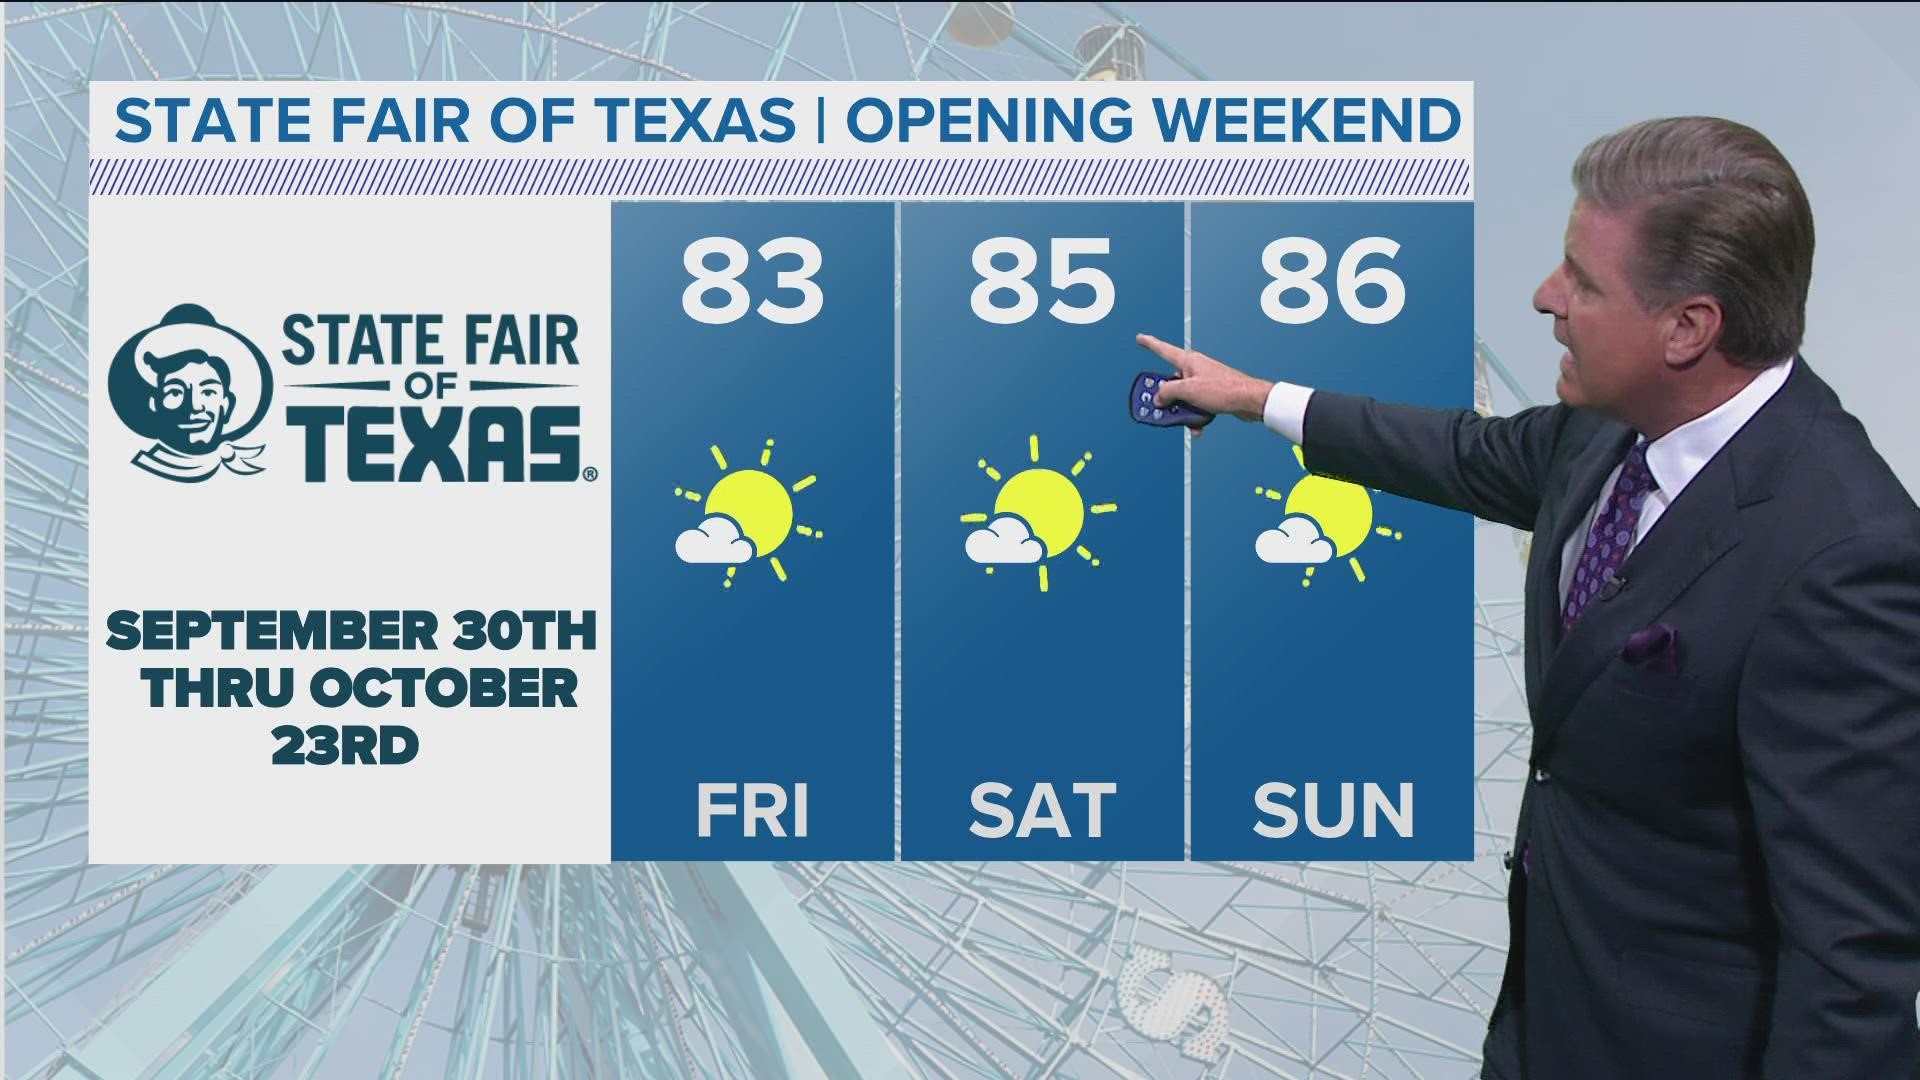 Headed to the State Fair of Texas this weekend? The weather's looking nice.